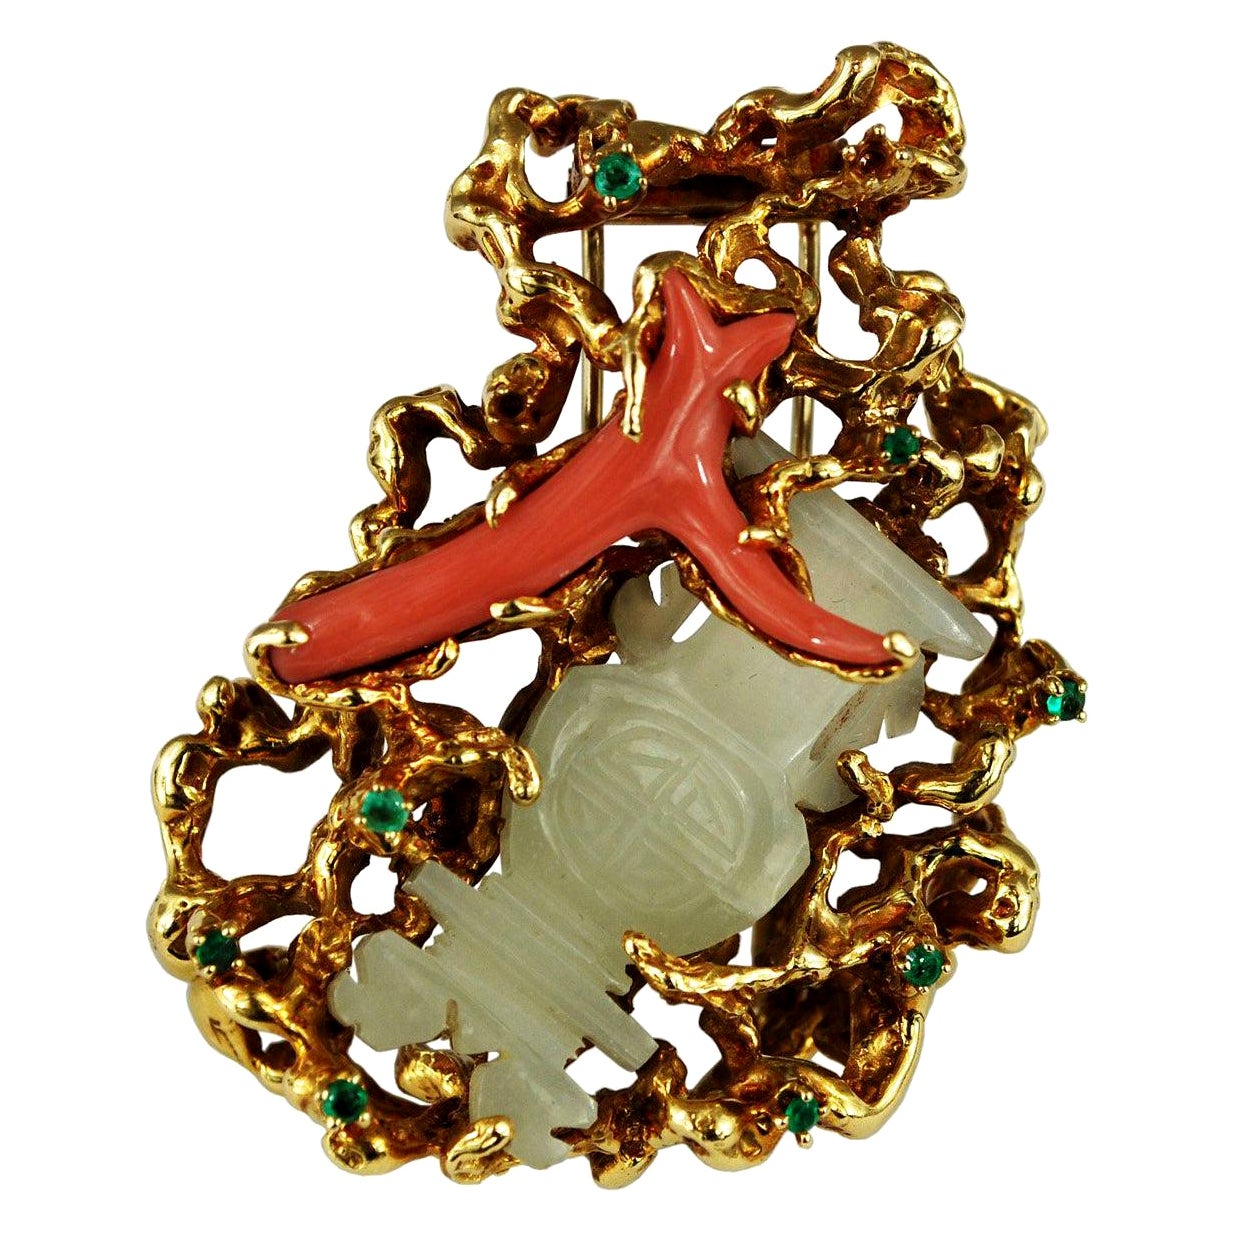 A large brooch by a famous jewelry designer Arthur King. The body of this unique freeform brooch is crafted out of 18K gold. Two centerpieces are clutched firmly in the base, one a whimsically shaped piece of coral, the other a pale jade piece